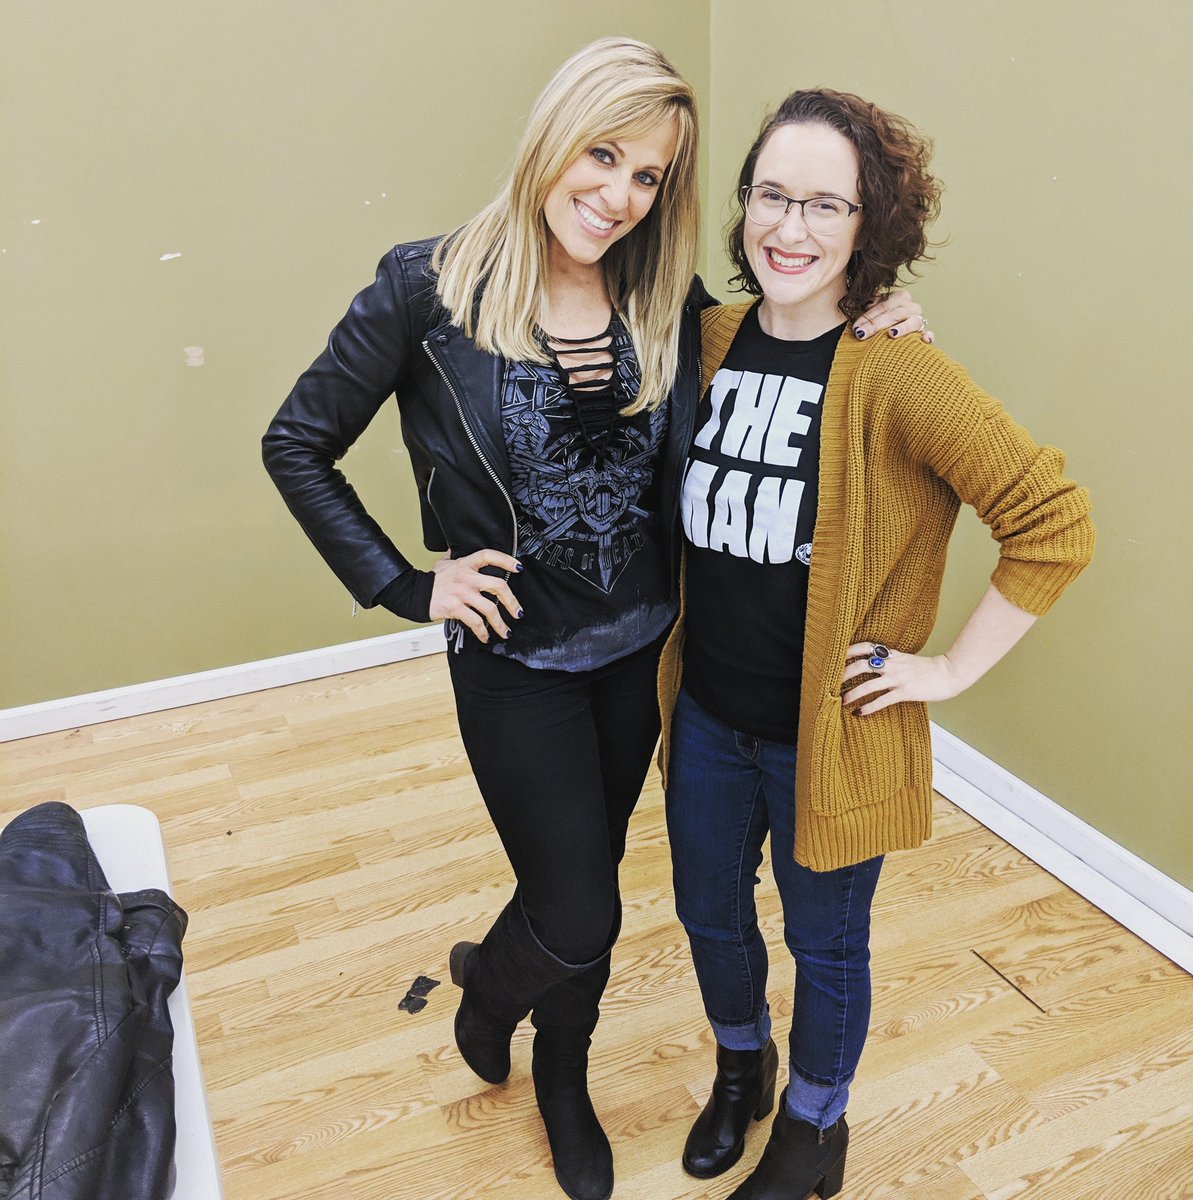 Met the amazing @LilianGarcia at MCW Pro Wrestling tonight and we talked all about The Man, @BeckyLynchWWE ! 

Genuinely a truly lovely person. Thanks for making my Saturday night!
.
.
.
.
.
#WWE #liliangarcia #marylandchampionshipwrestling #mondaynightraw #SDLive